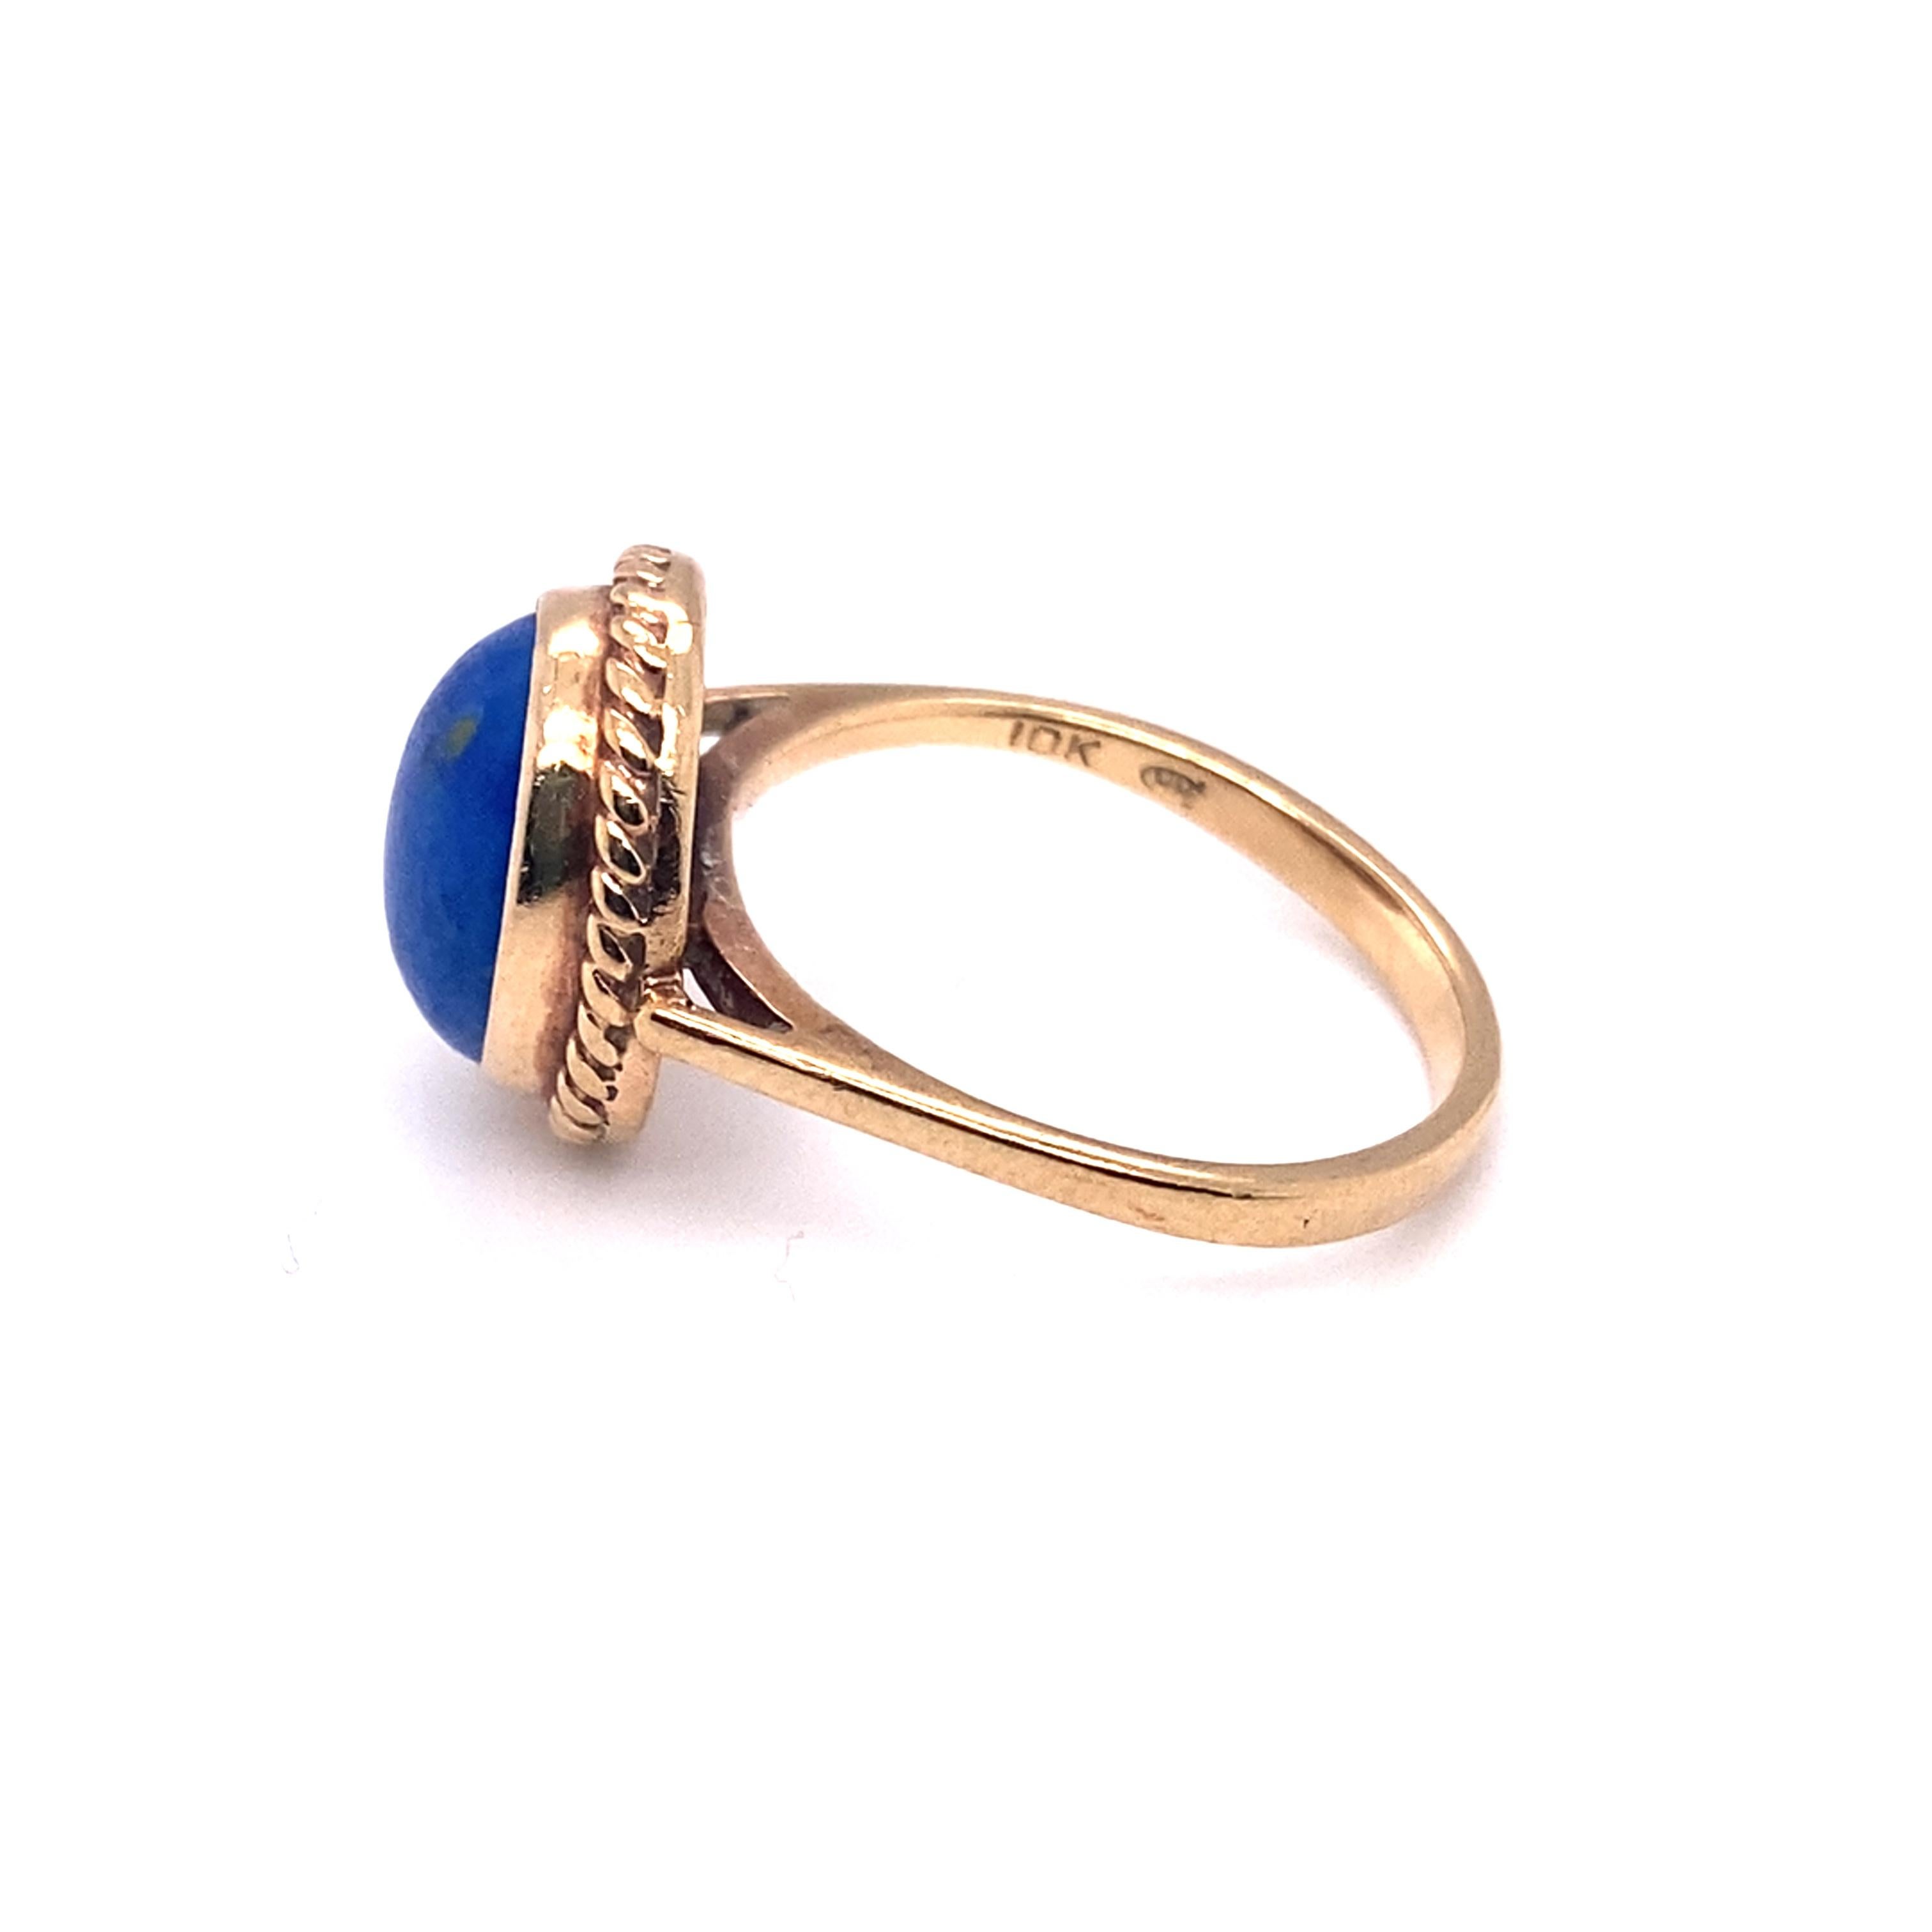 Contemporary 1950s Lapis Cabochon Ring in 10 Karat Yellow Gold